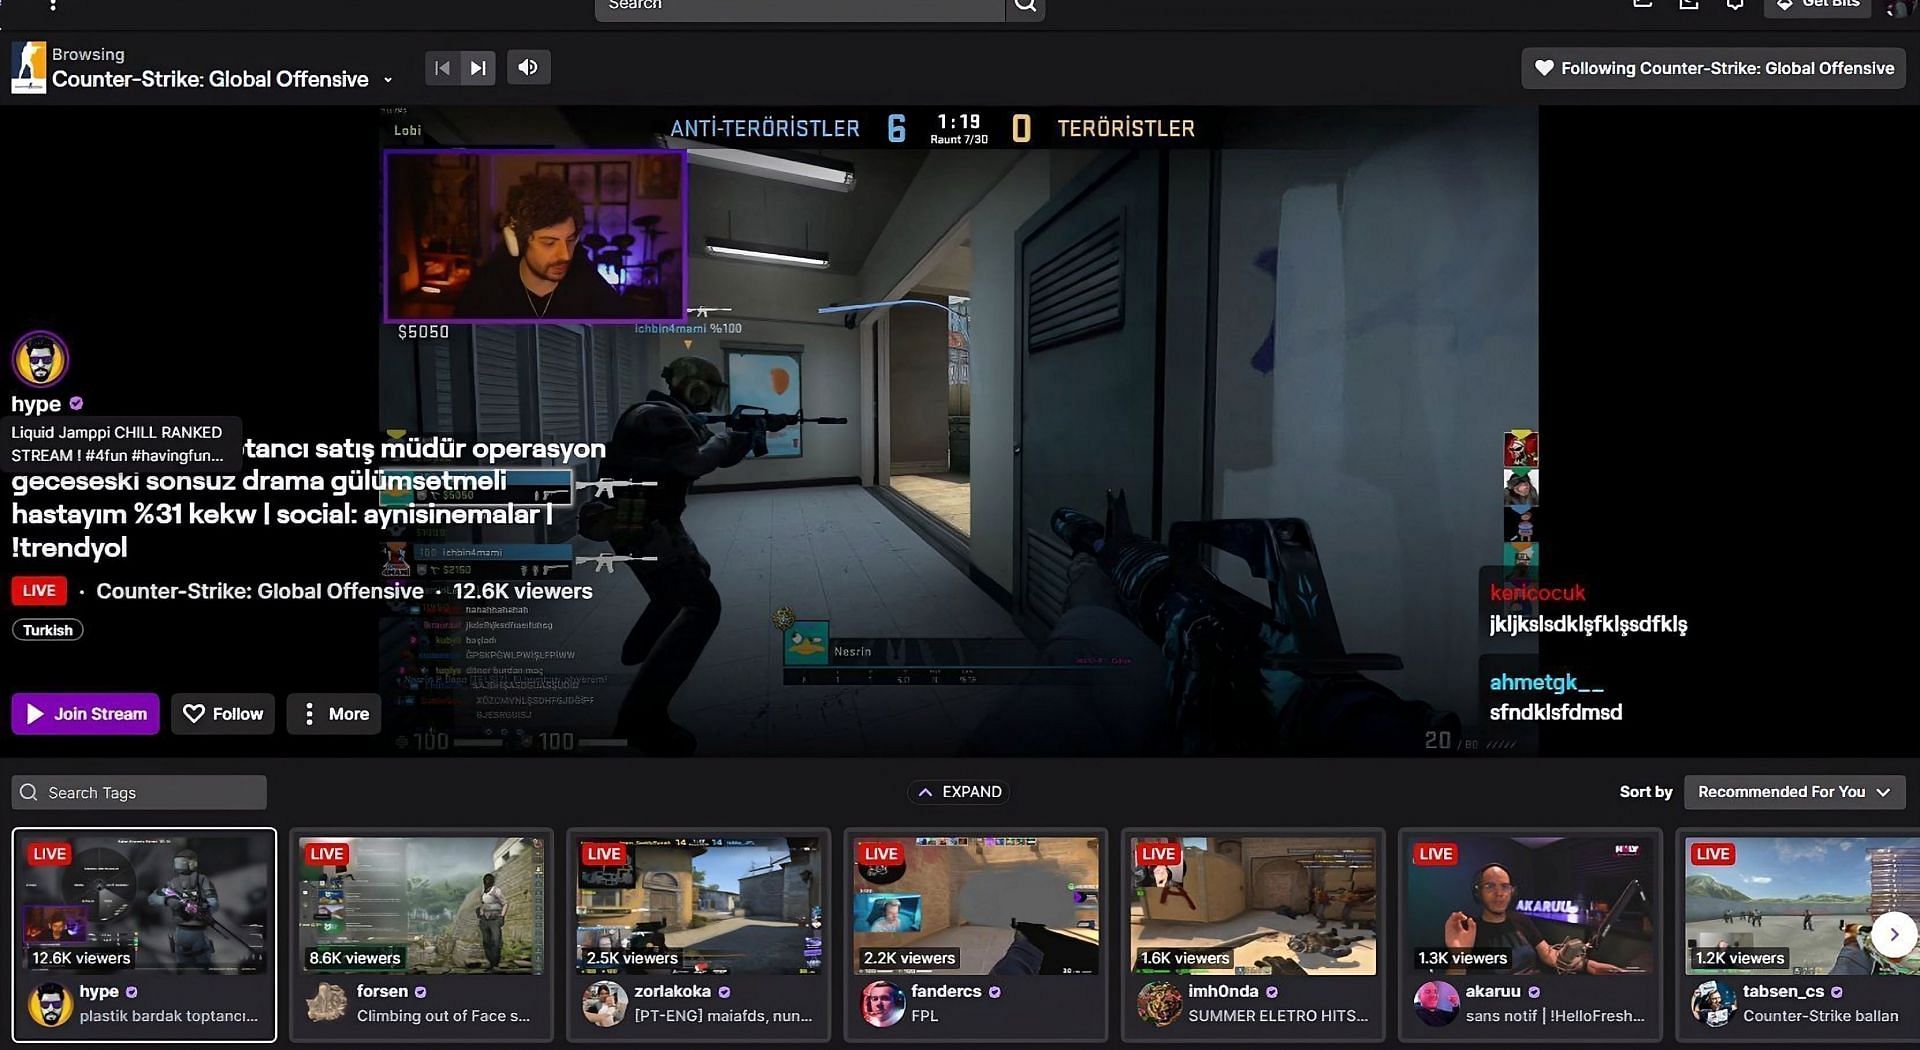 The new Twitch update changes the Browse page (Image via Hac1/Twitter)